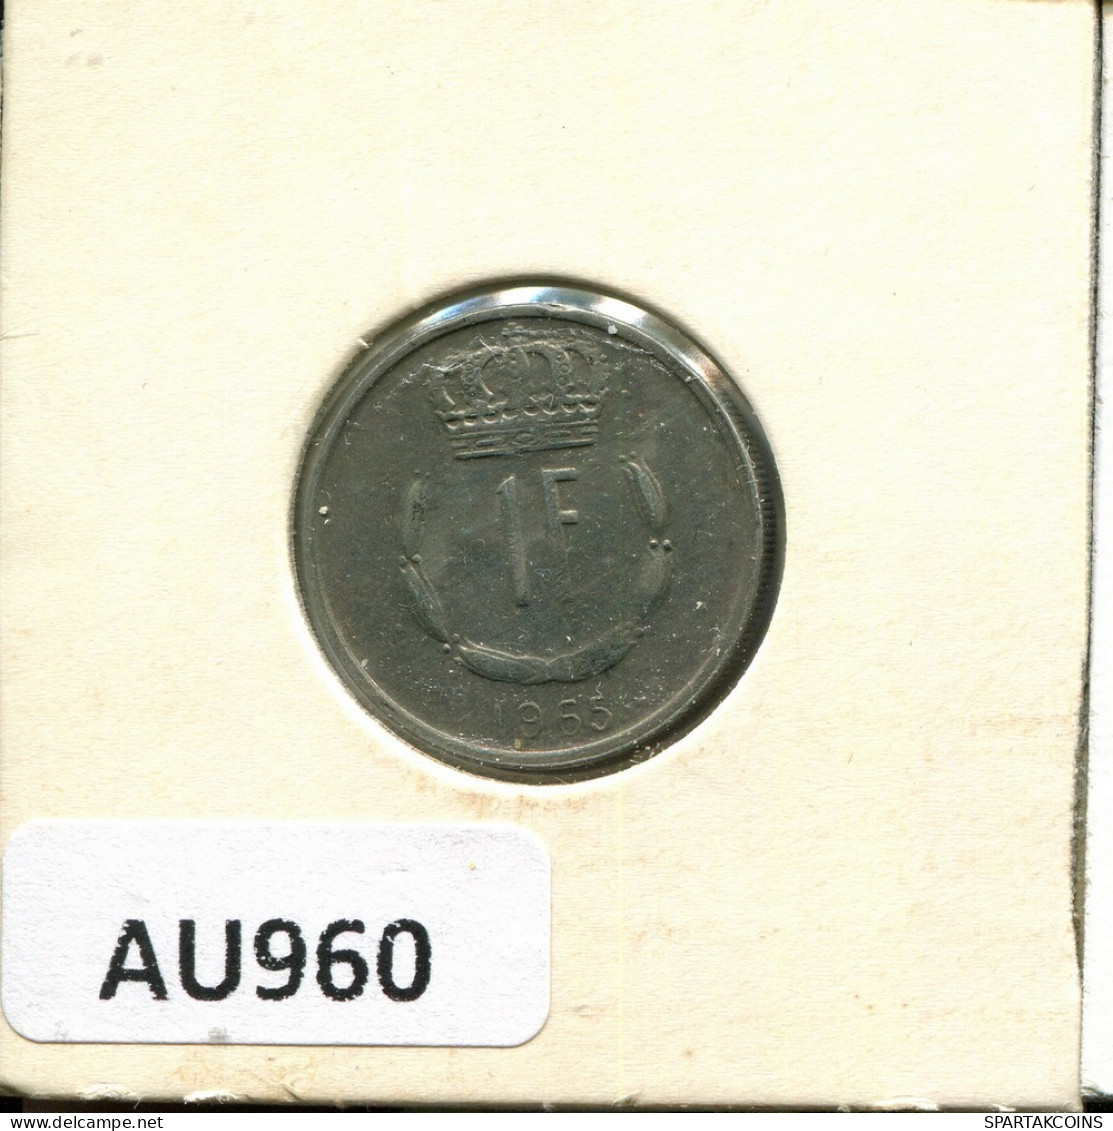 1 FRANC 1956 LUXEMBOURG Pièce #AU960.F.A - Luxembourg